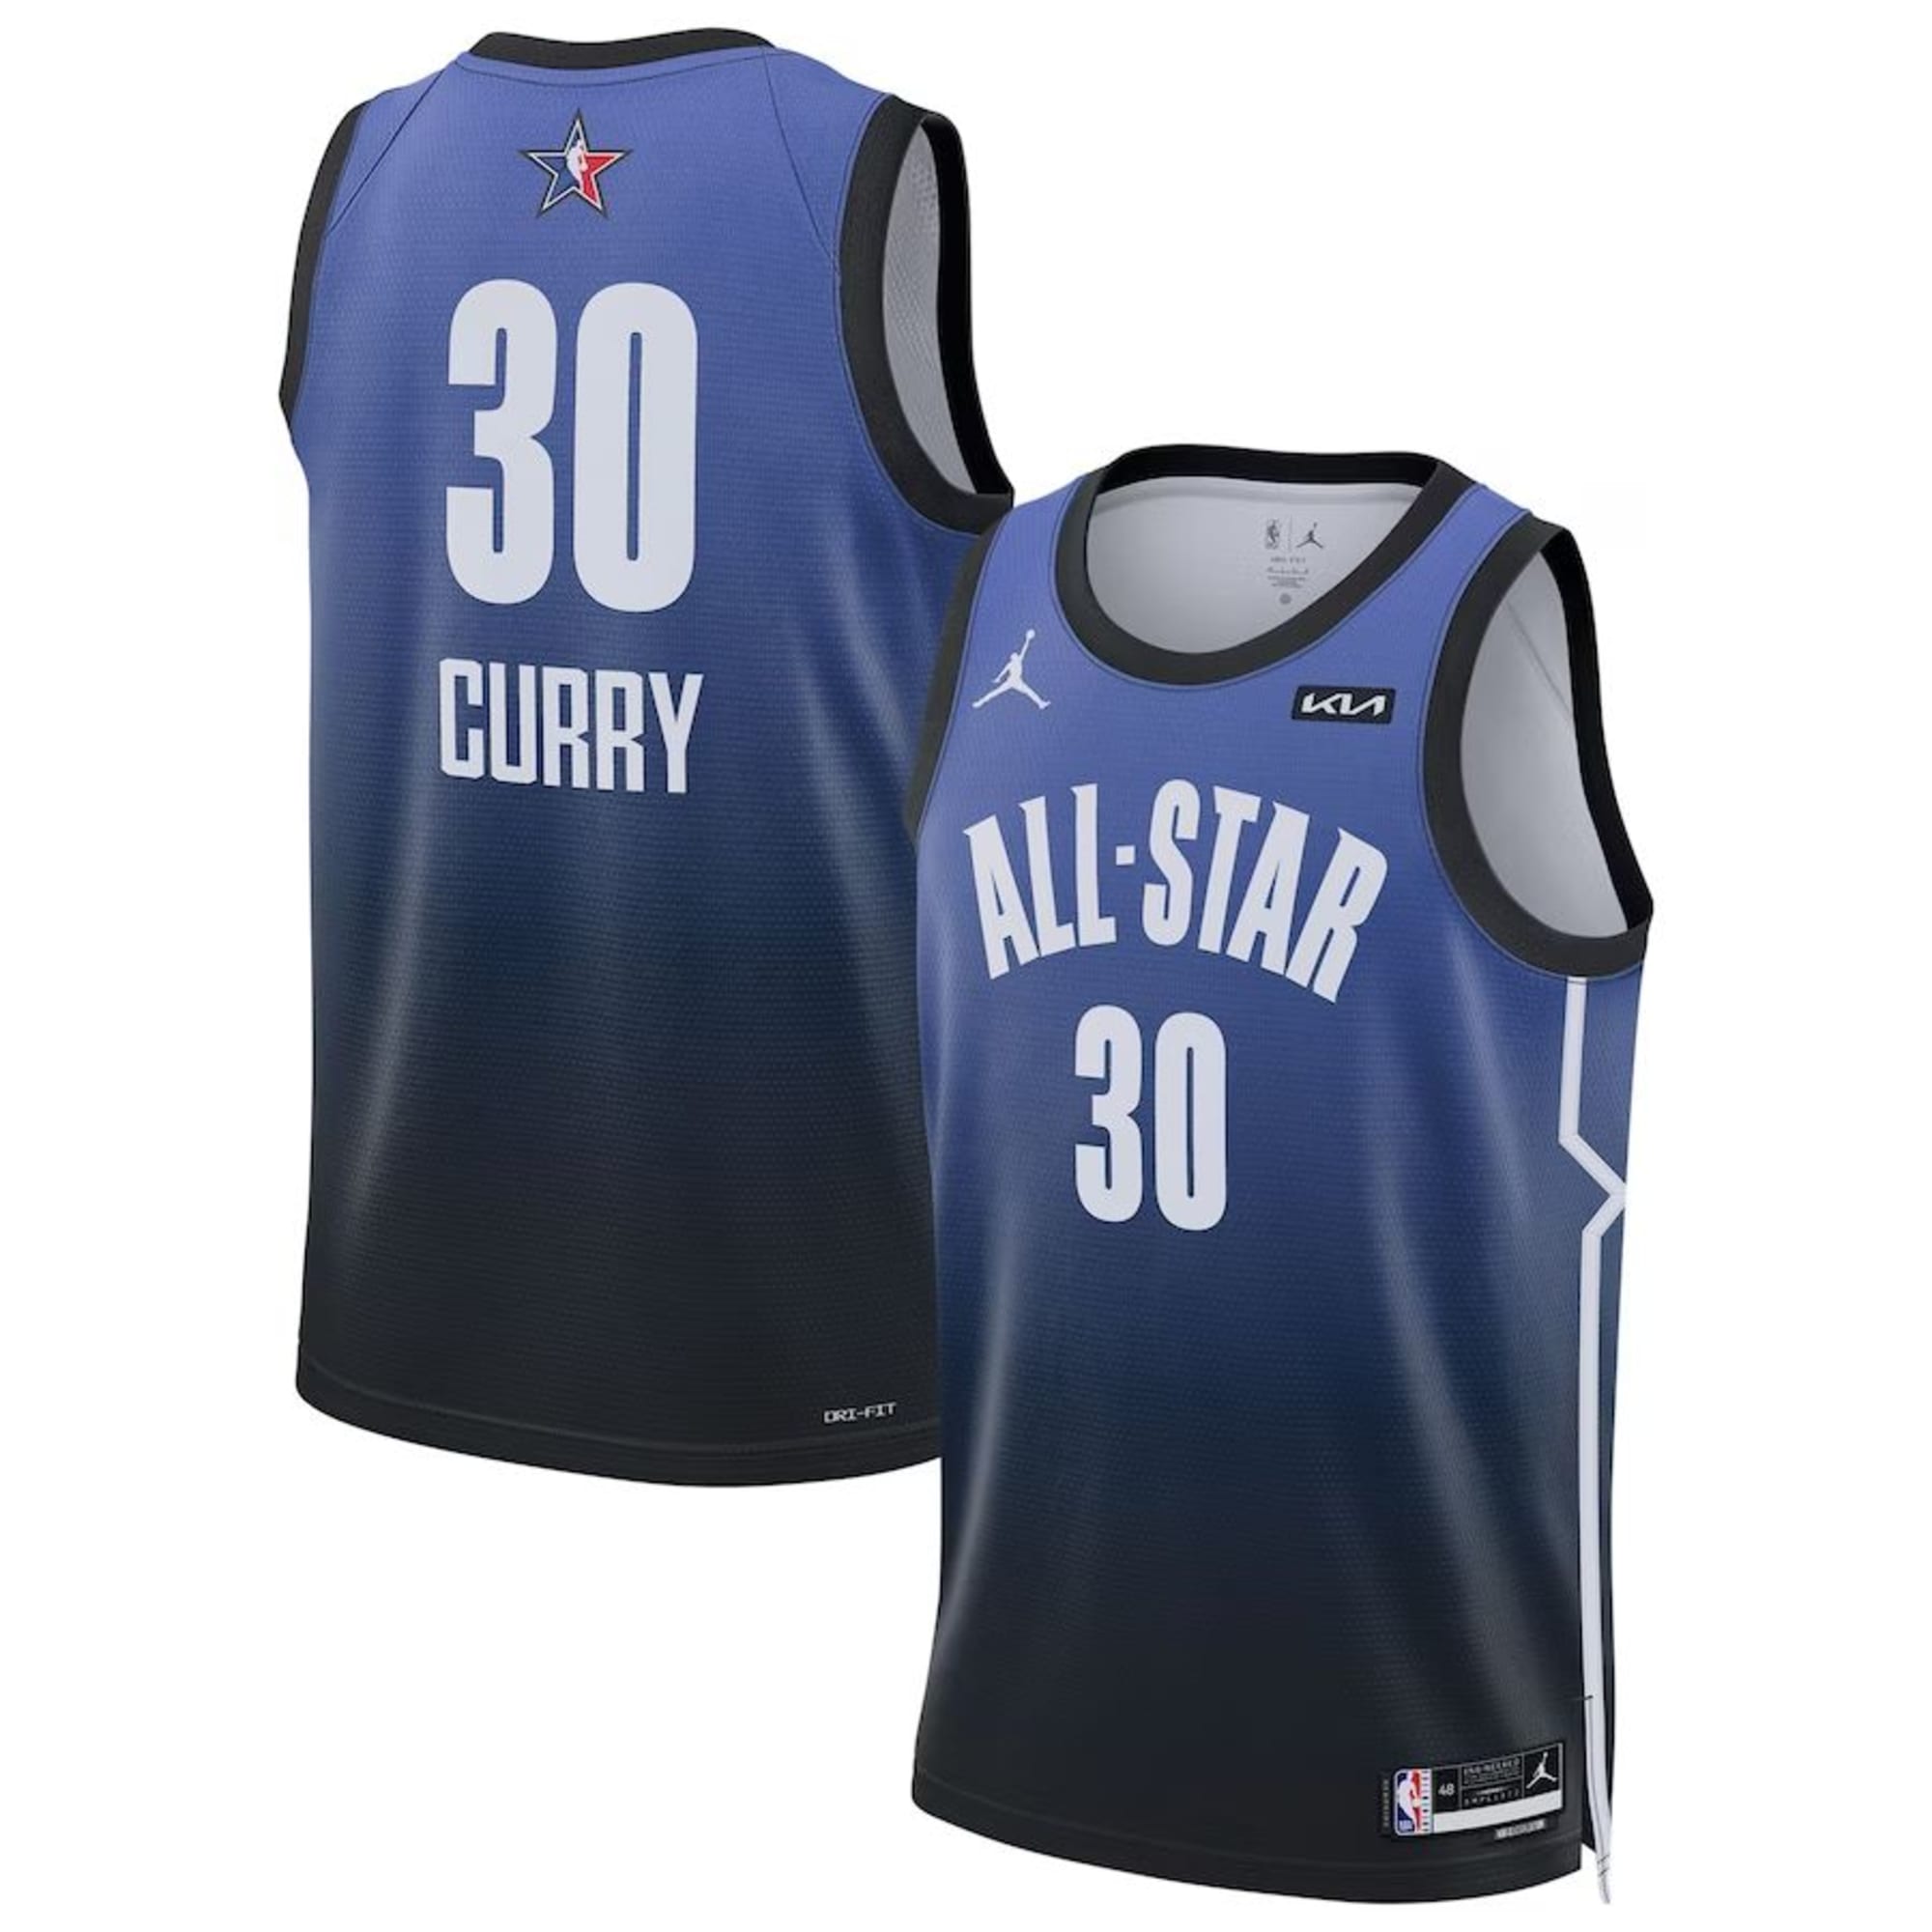 Order your 2023 Steph Curry AllStar merchandise today